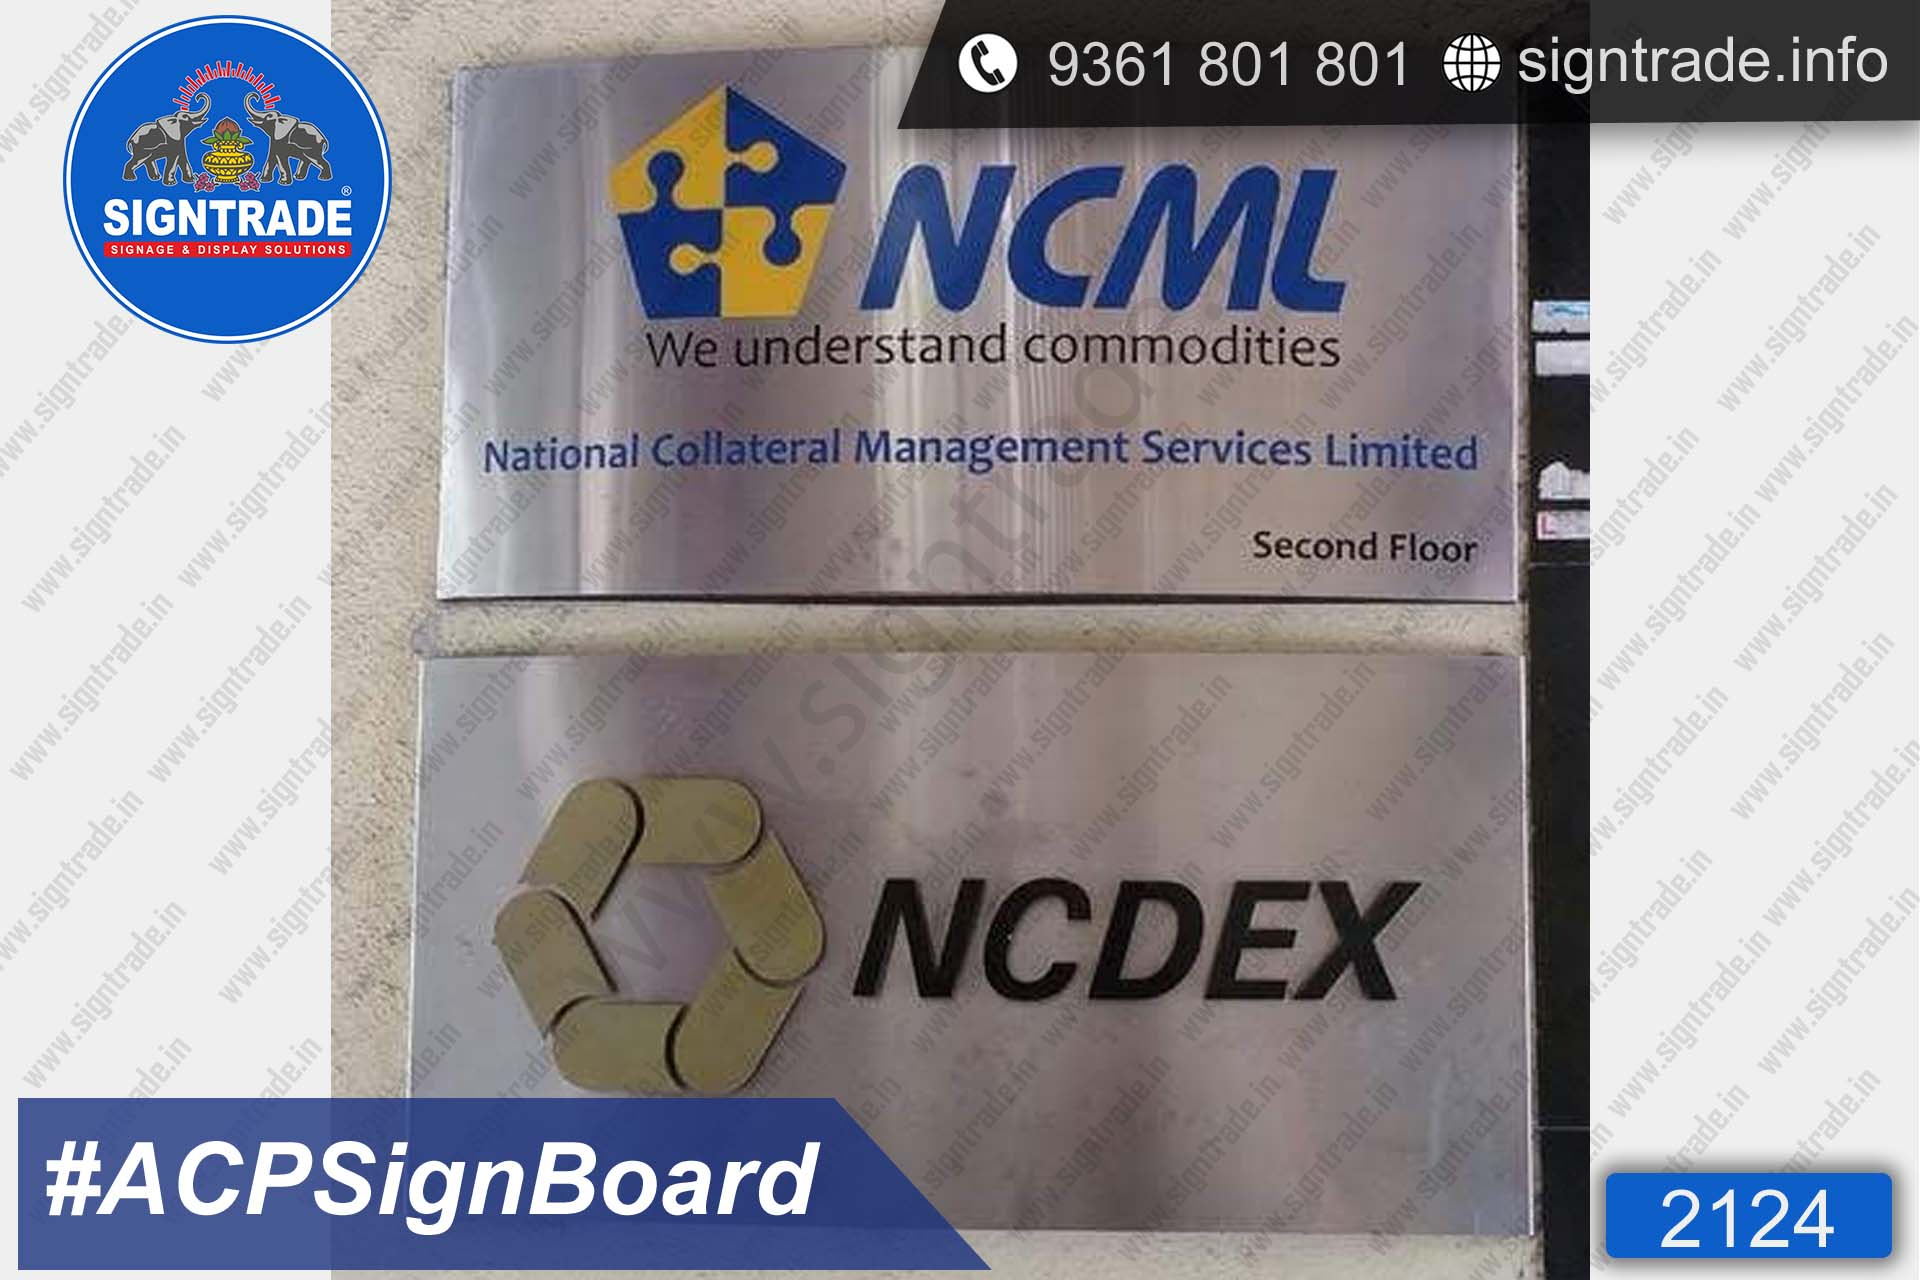 National Collateral Management Services Limited